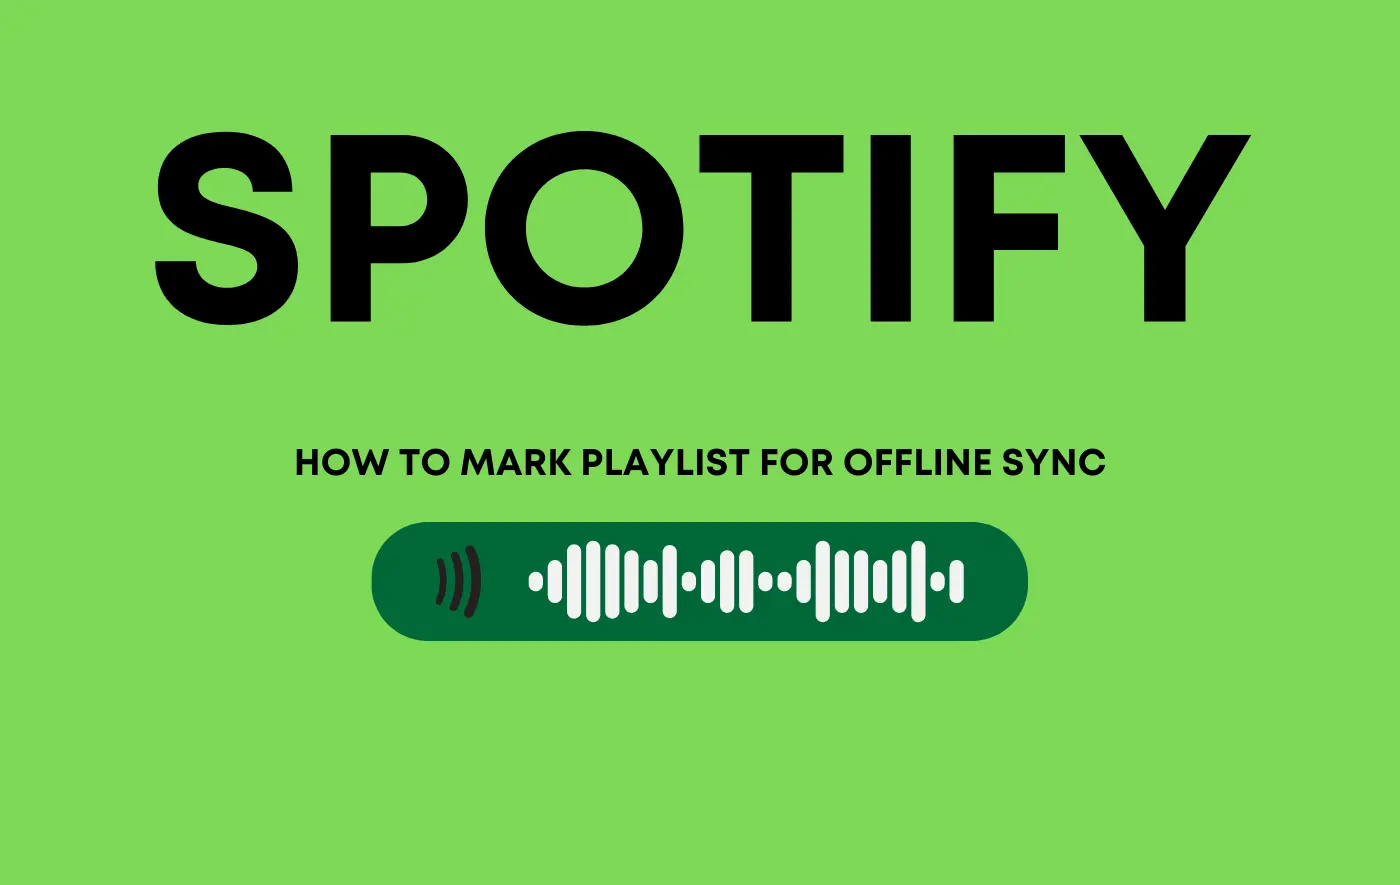 How to Mark Playlist for Offline Sync